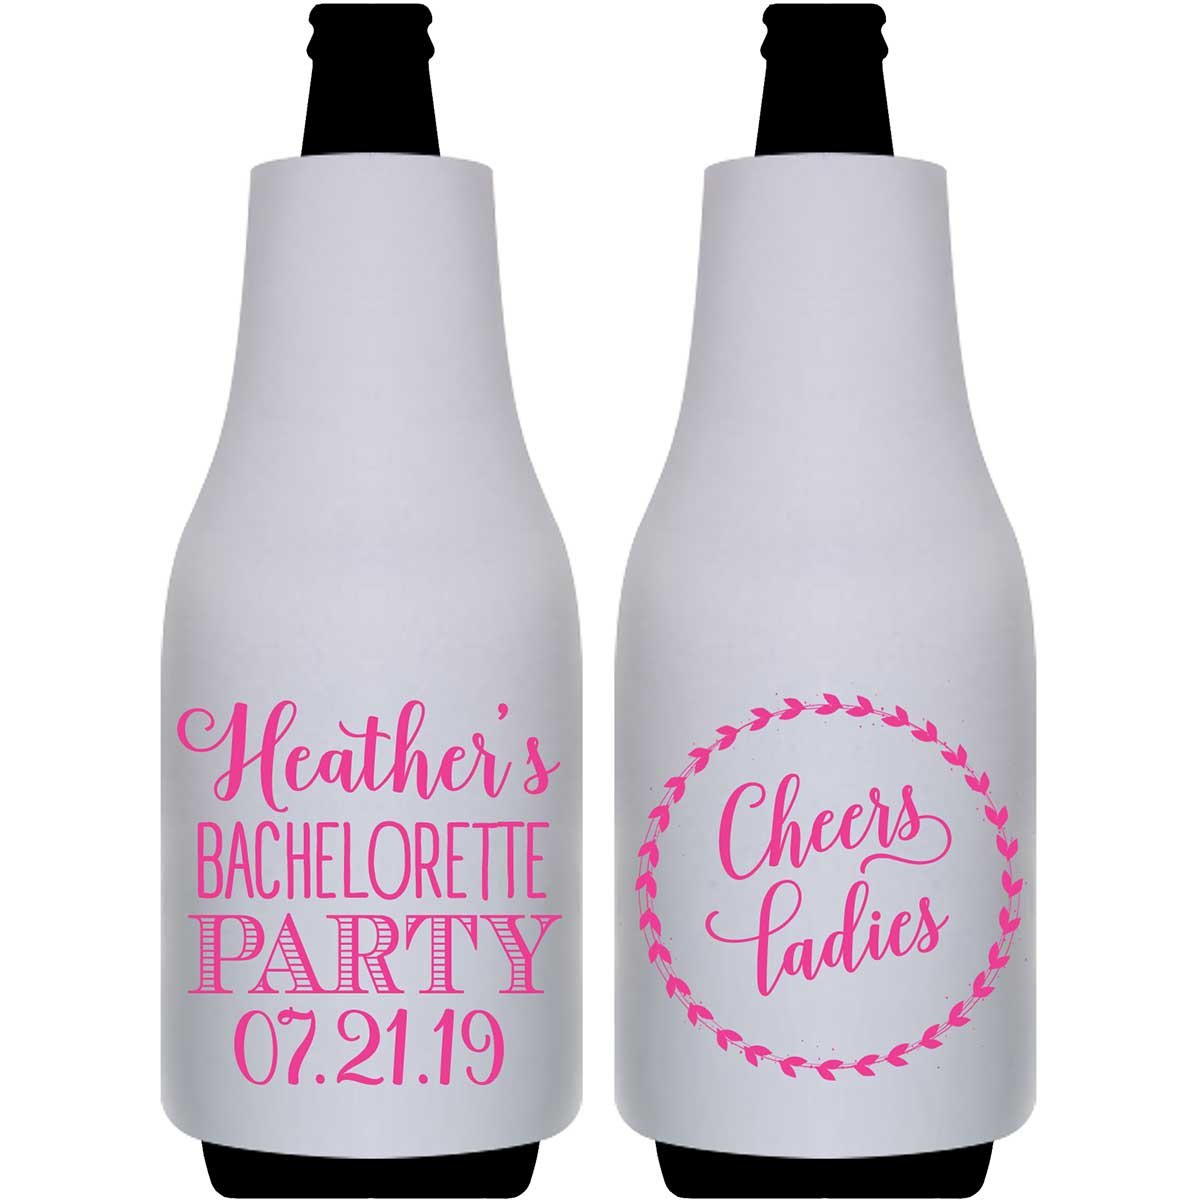 Cheers Ladies Bachelorette 1A Foldable Bottle Sleeve Koozies Wedding Gifts for Guests